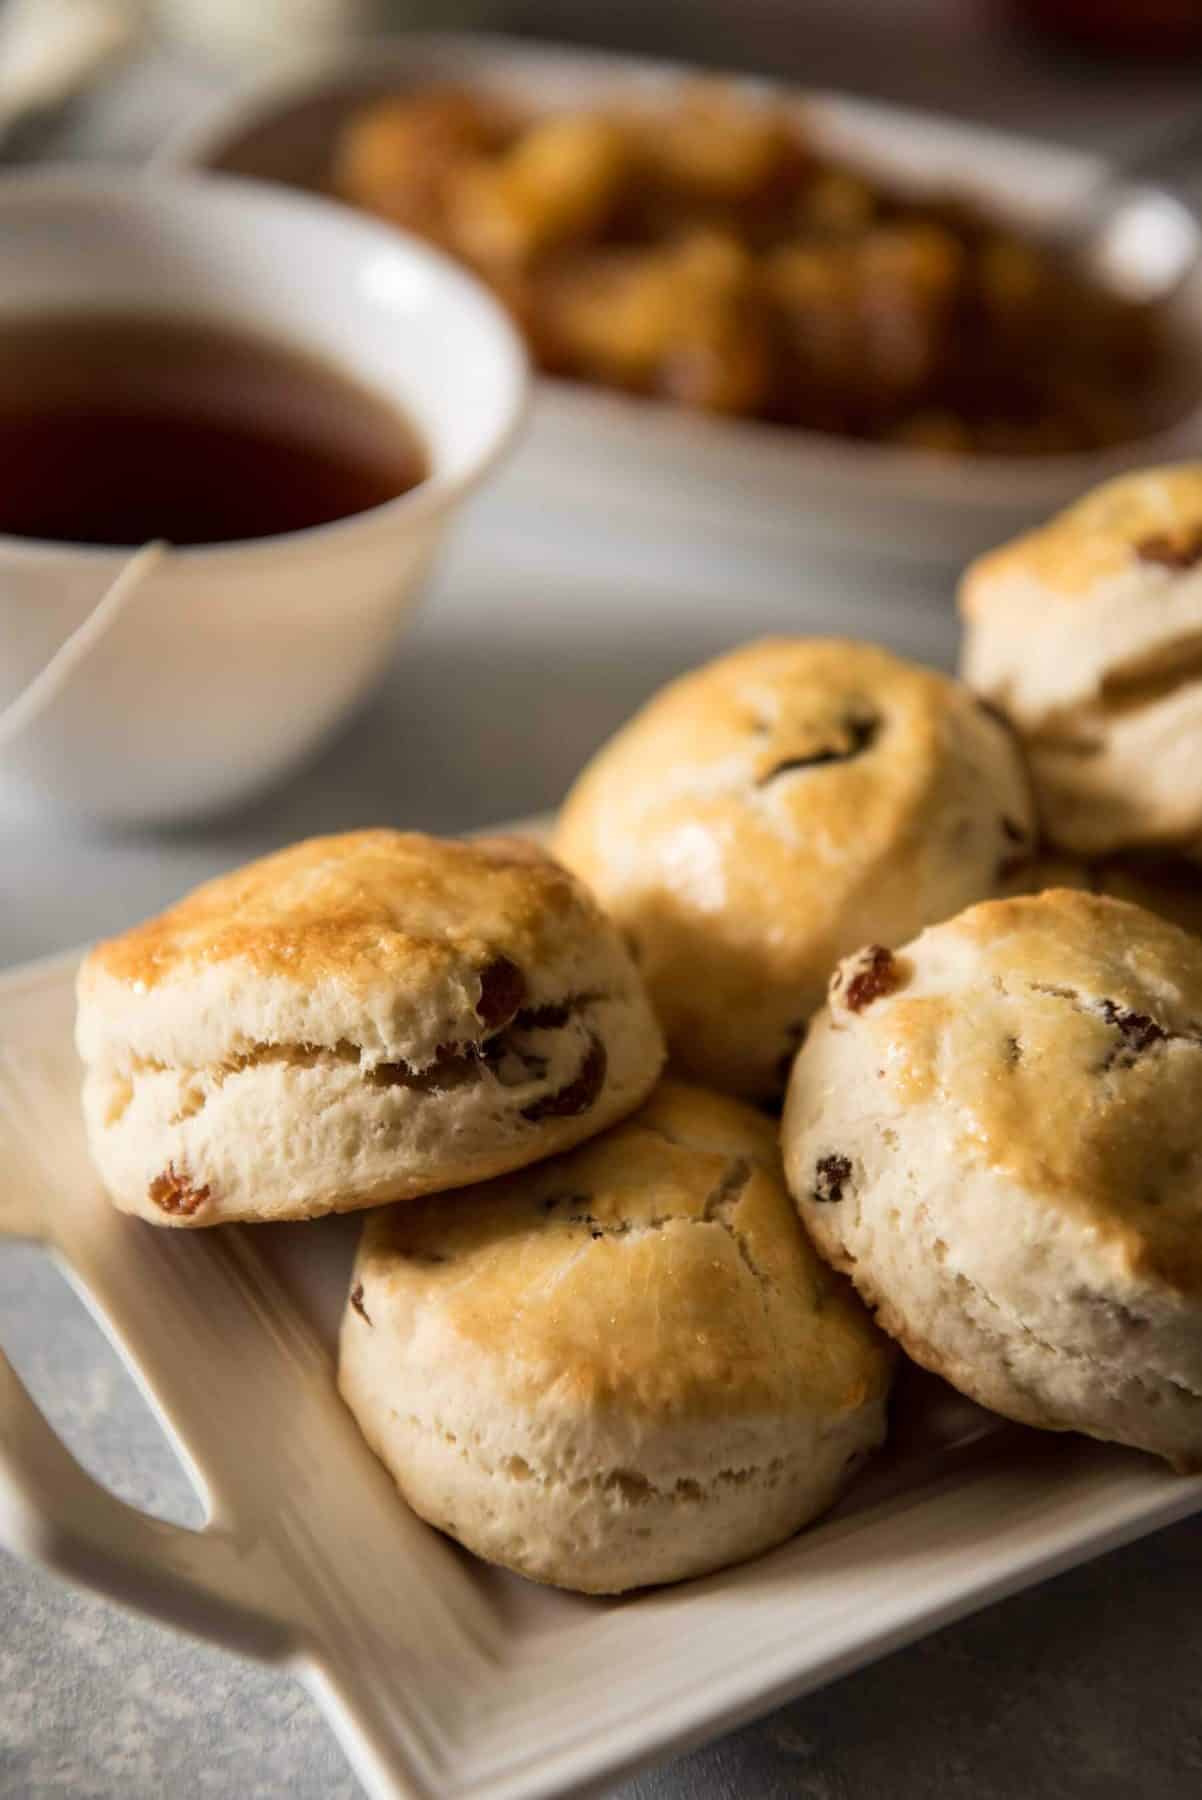 Perfect for brunch or as part of your afternoon tea time, these English Raisin Scones with Apple Jam are slightly sweet, fluffy, unique version of the popular British pastry.